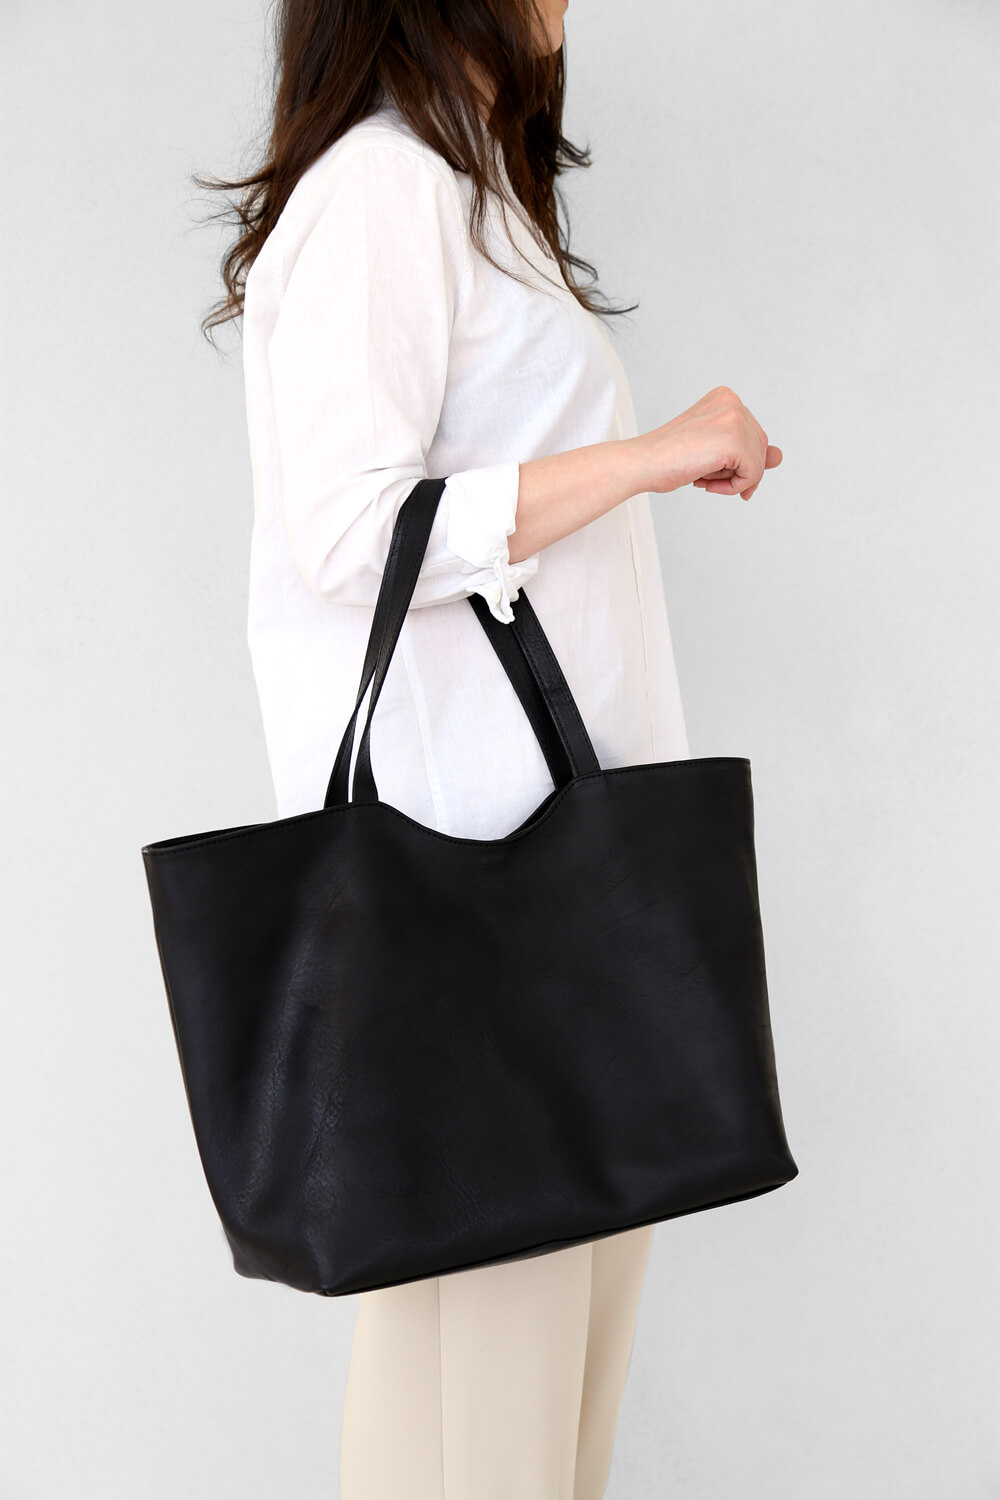 Riu Embossed leather tote bagトートバッグ リウ - トートバッグ